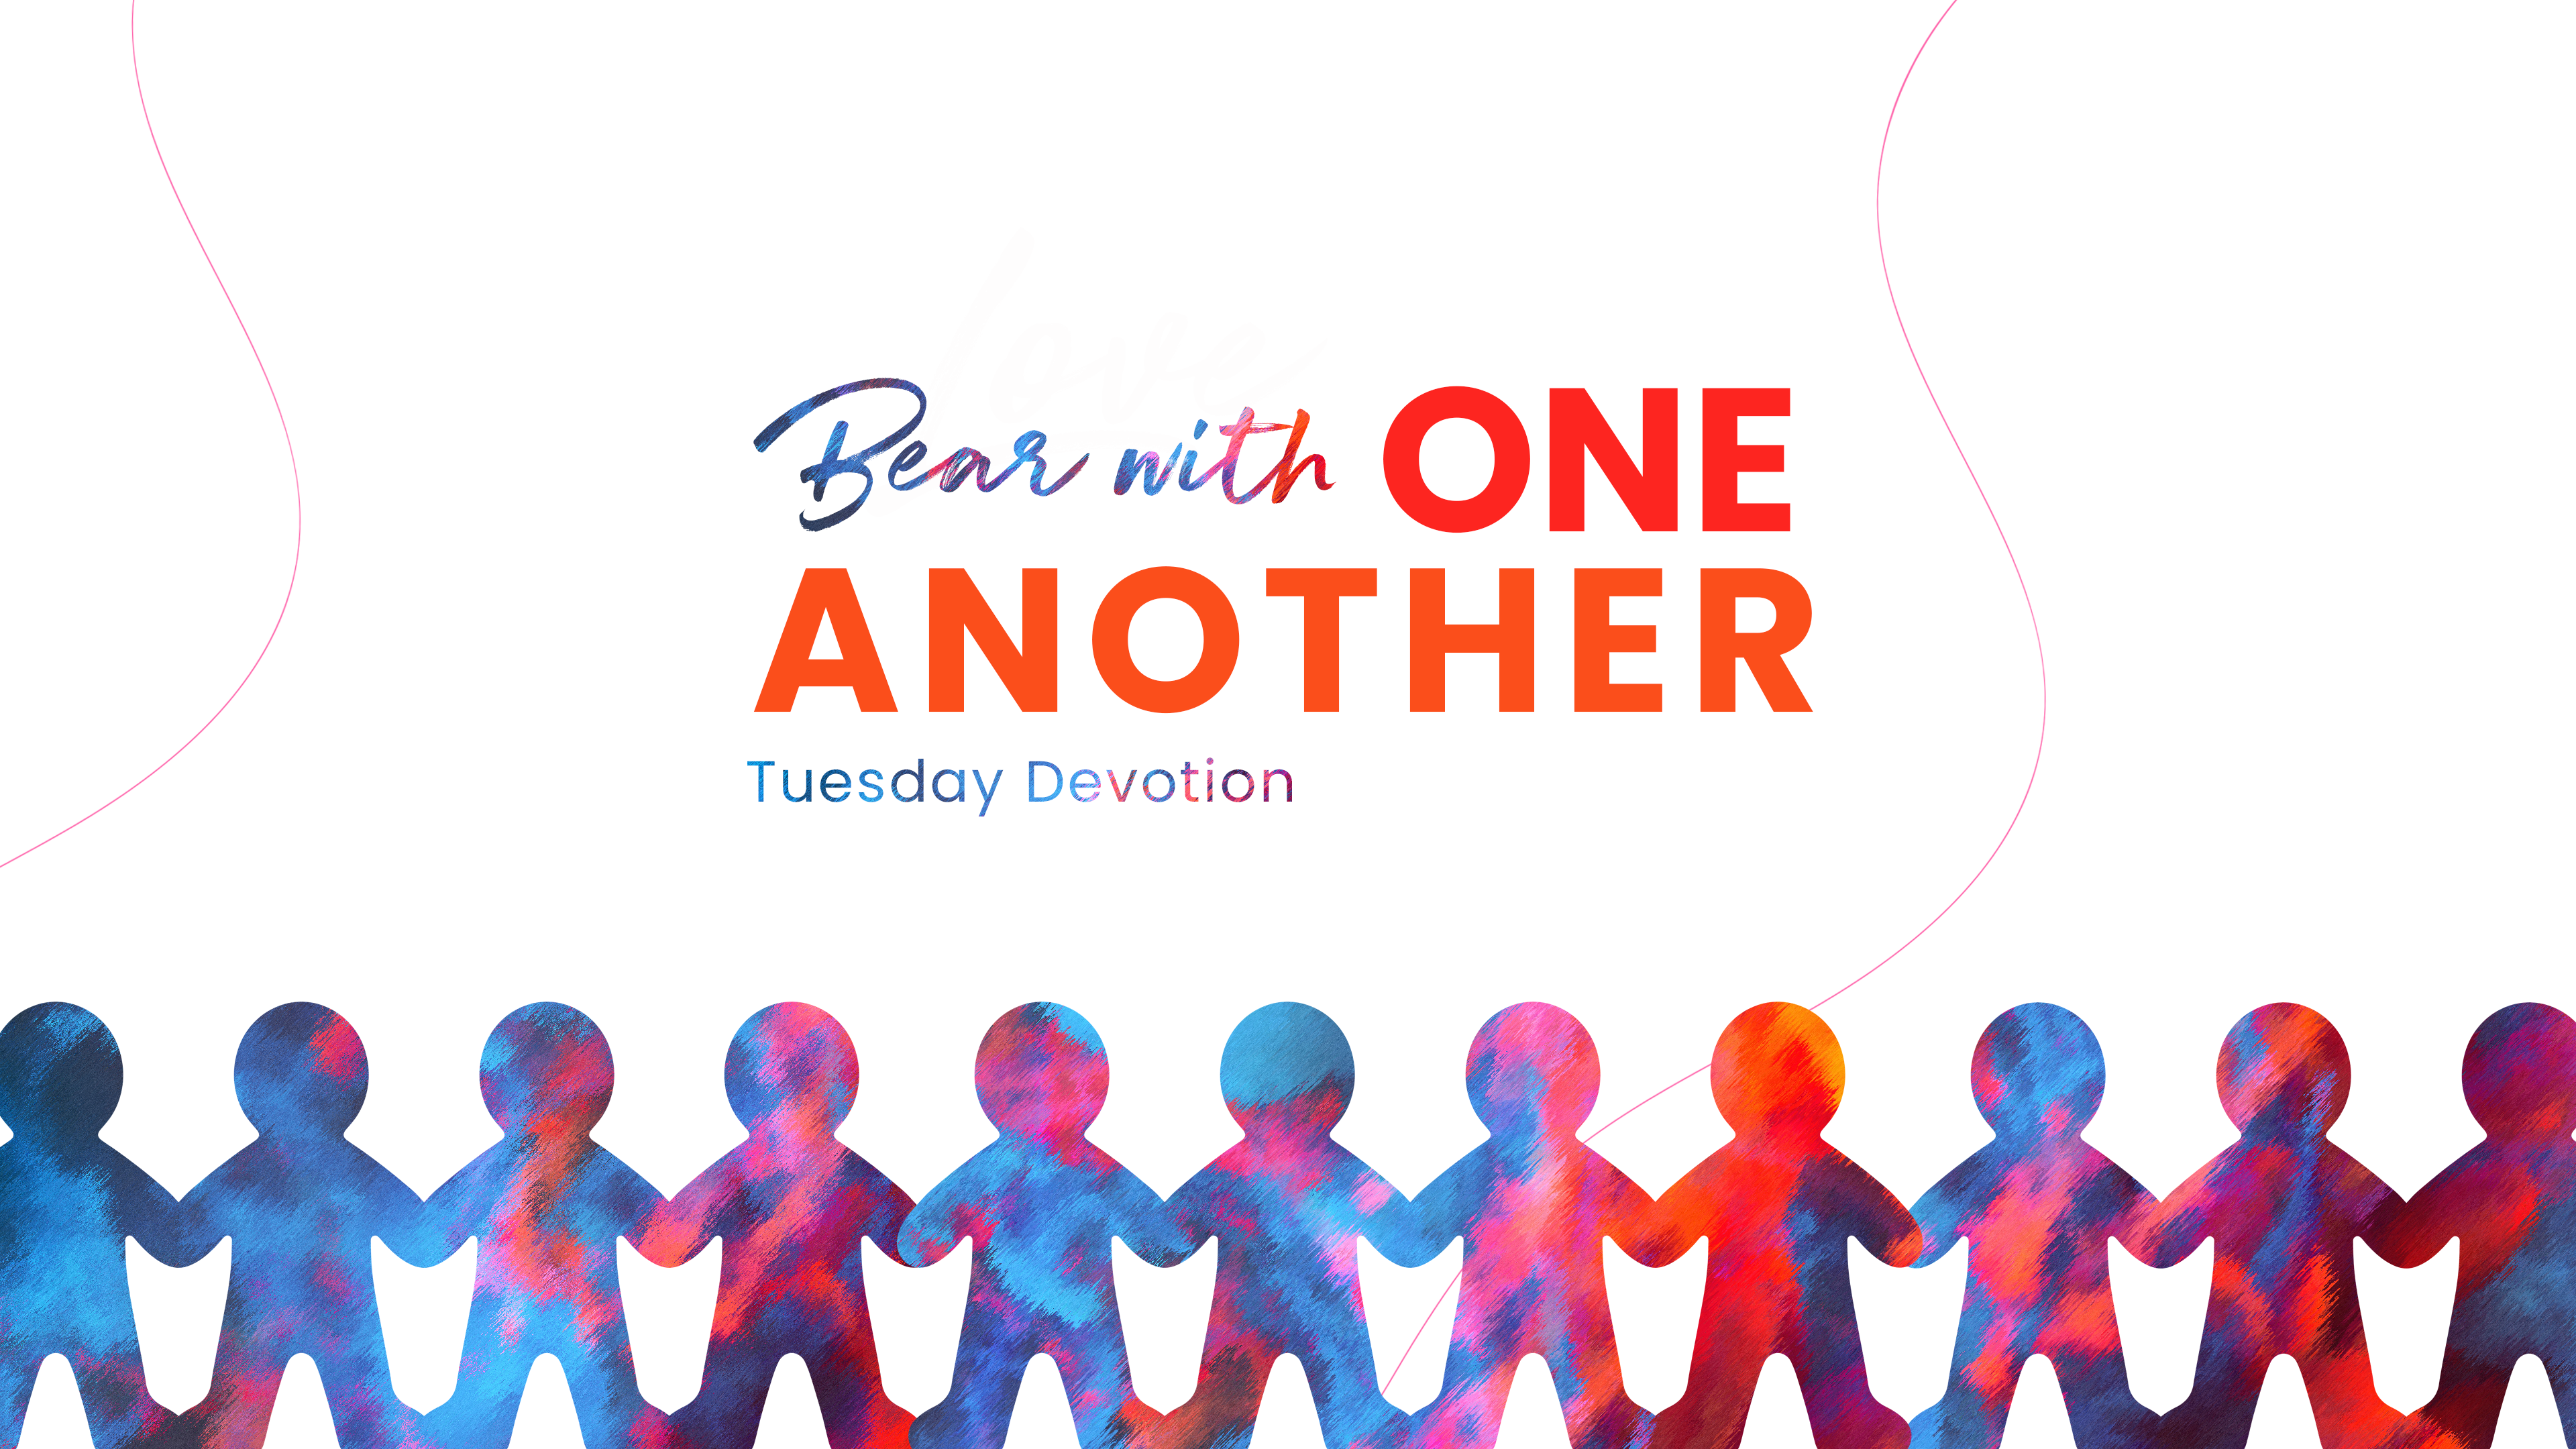 Tuesday Devotion: Bear with One Another